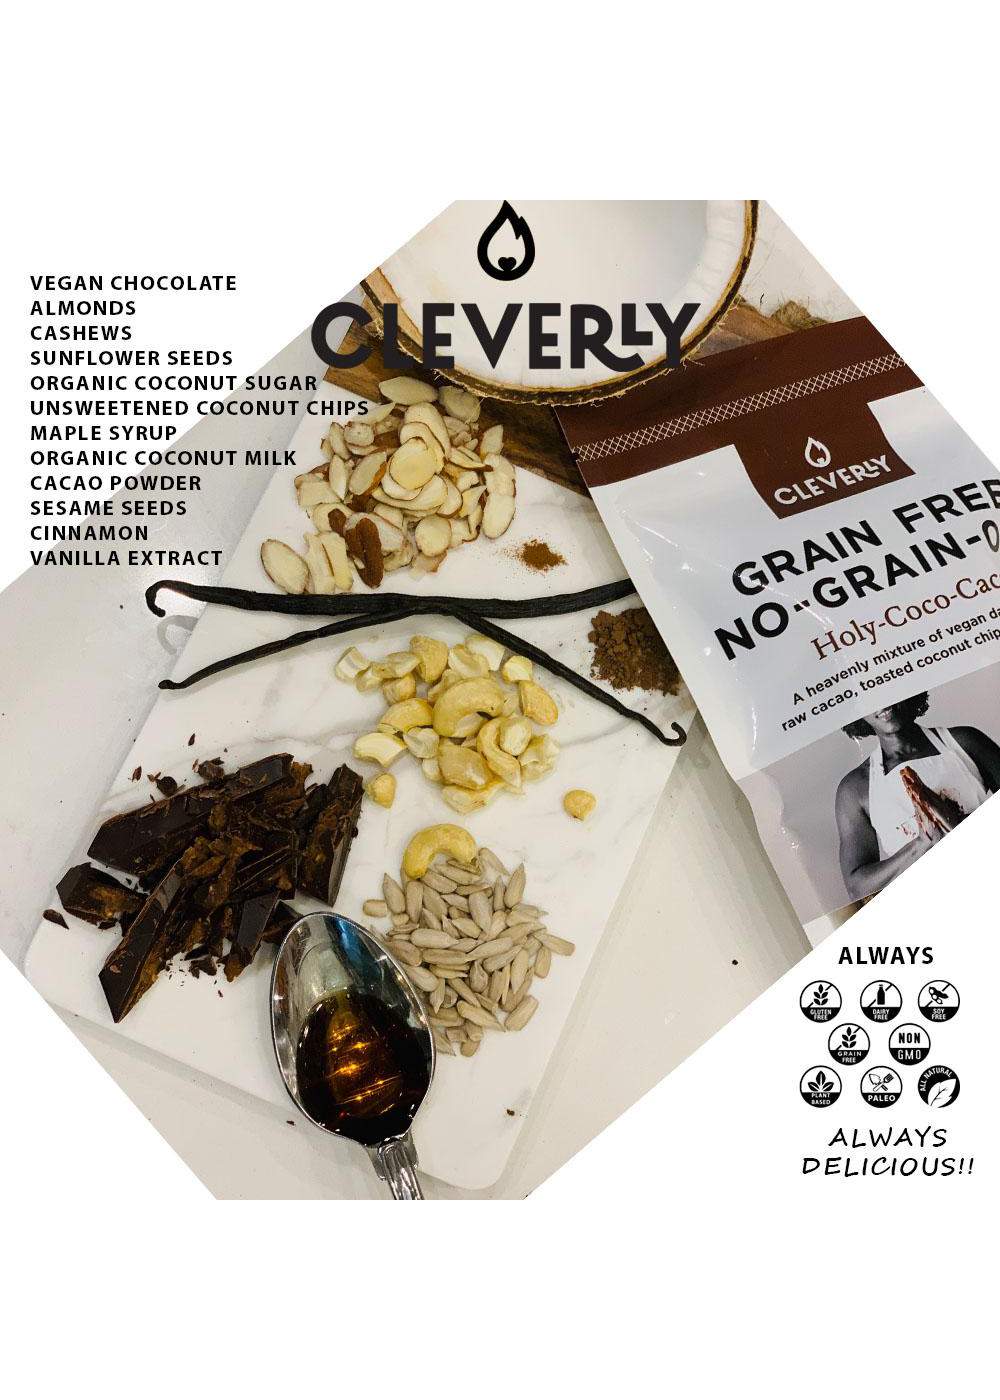 Cleverly Grain-Free No-Grain-Ola - Holy-Coco-Cacao! - Shop Cereal at H-E-B